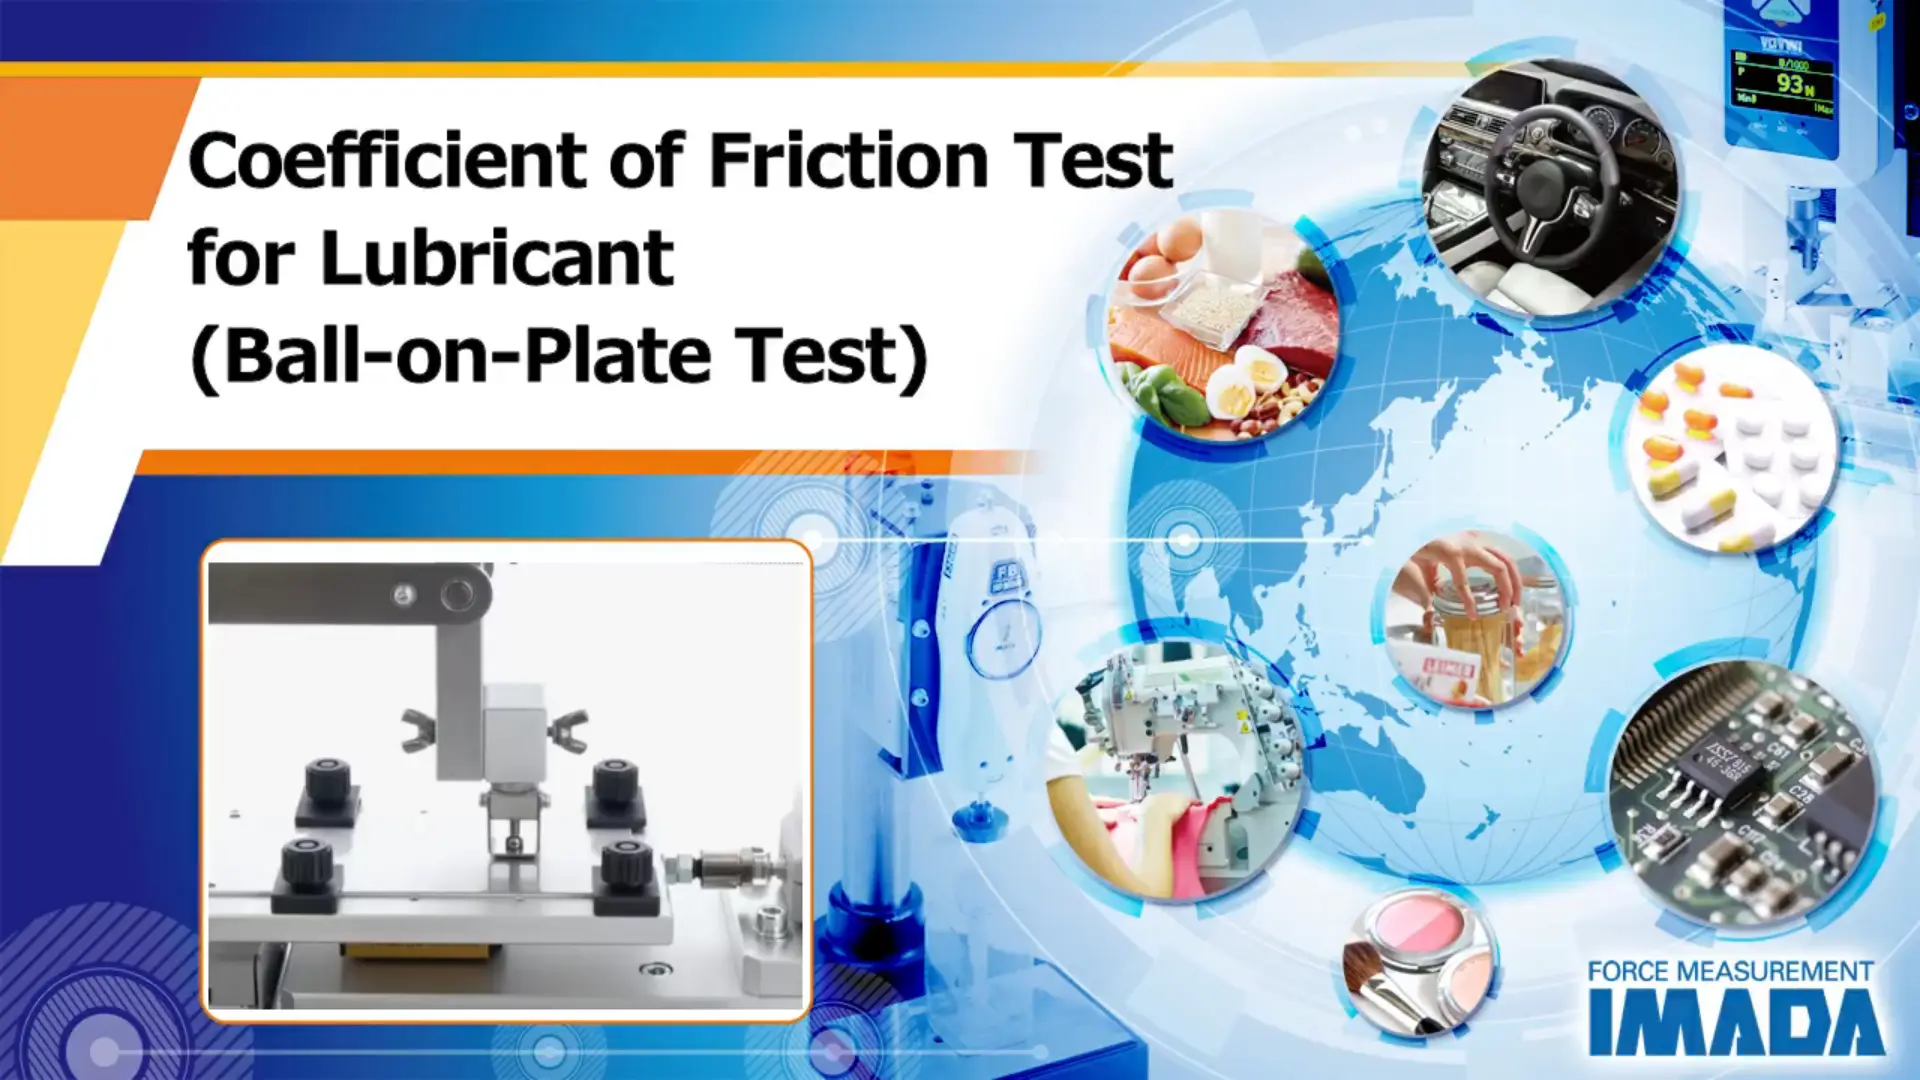 Coefficient of Friction Test for Lubricant (Ball-on-Plate Test)